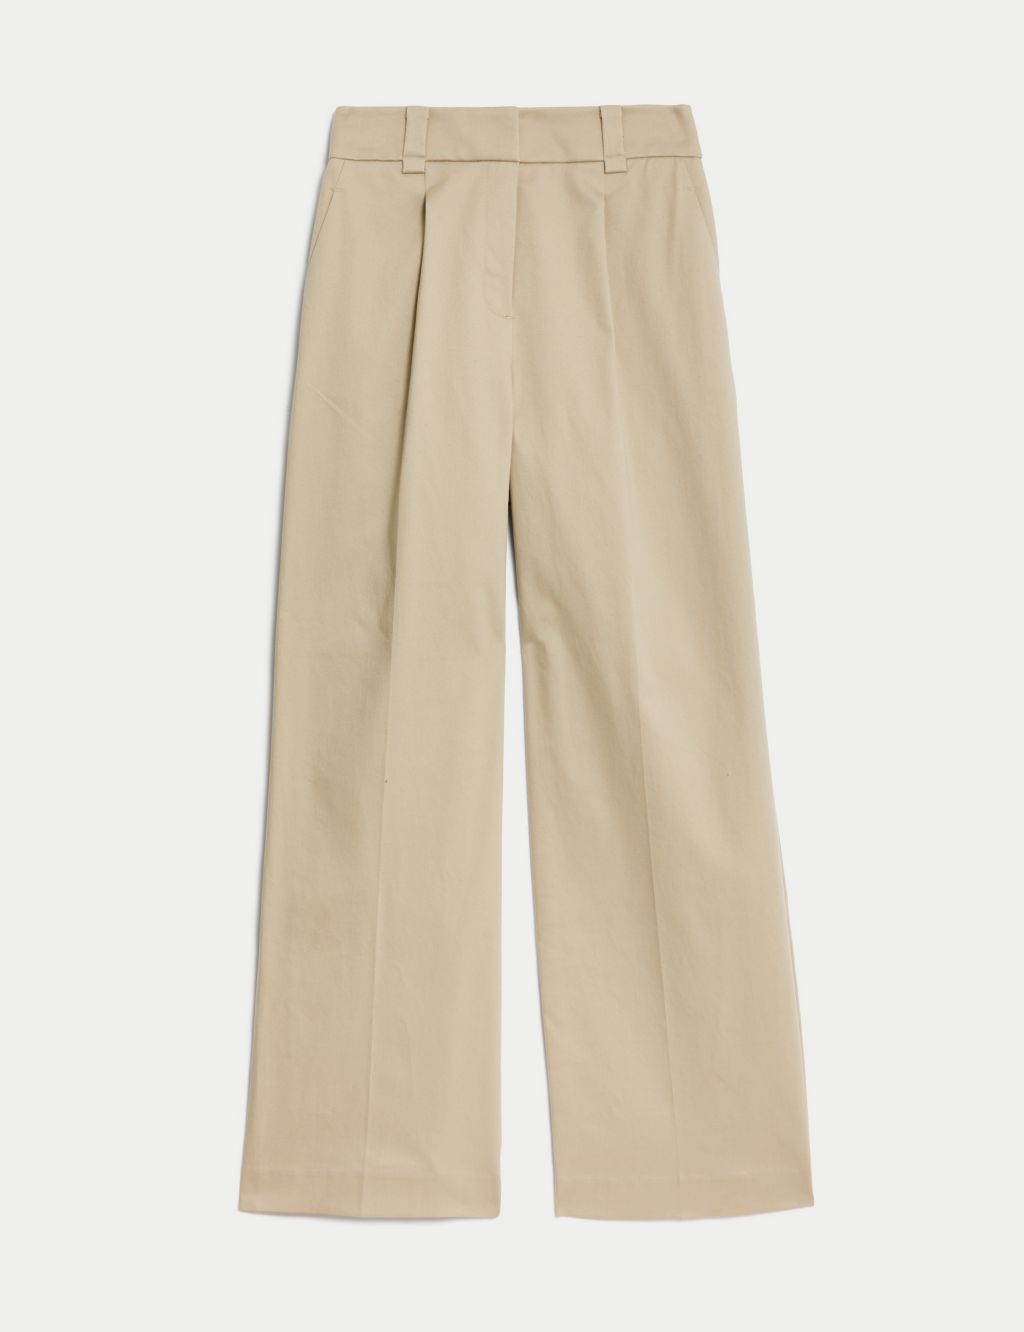 Cotton Rich Pleat Front Wide Leg Chinos image 2